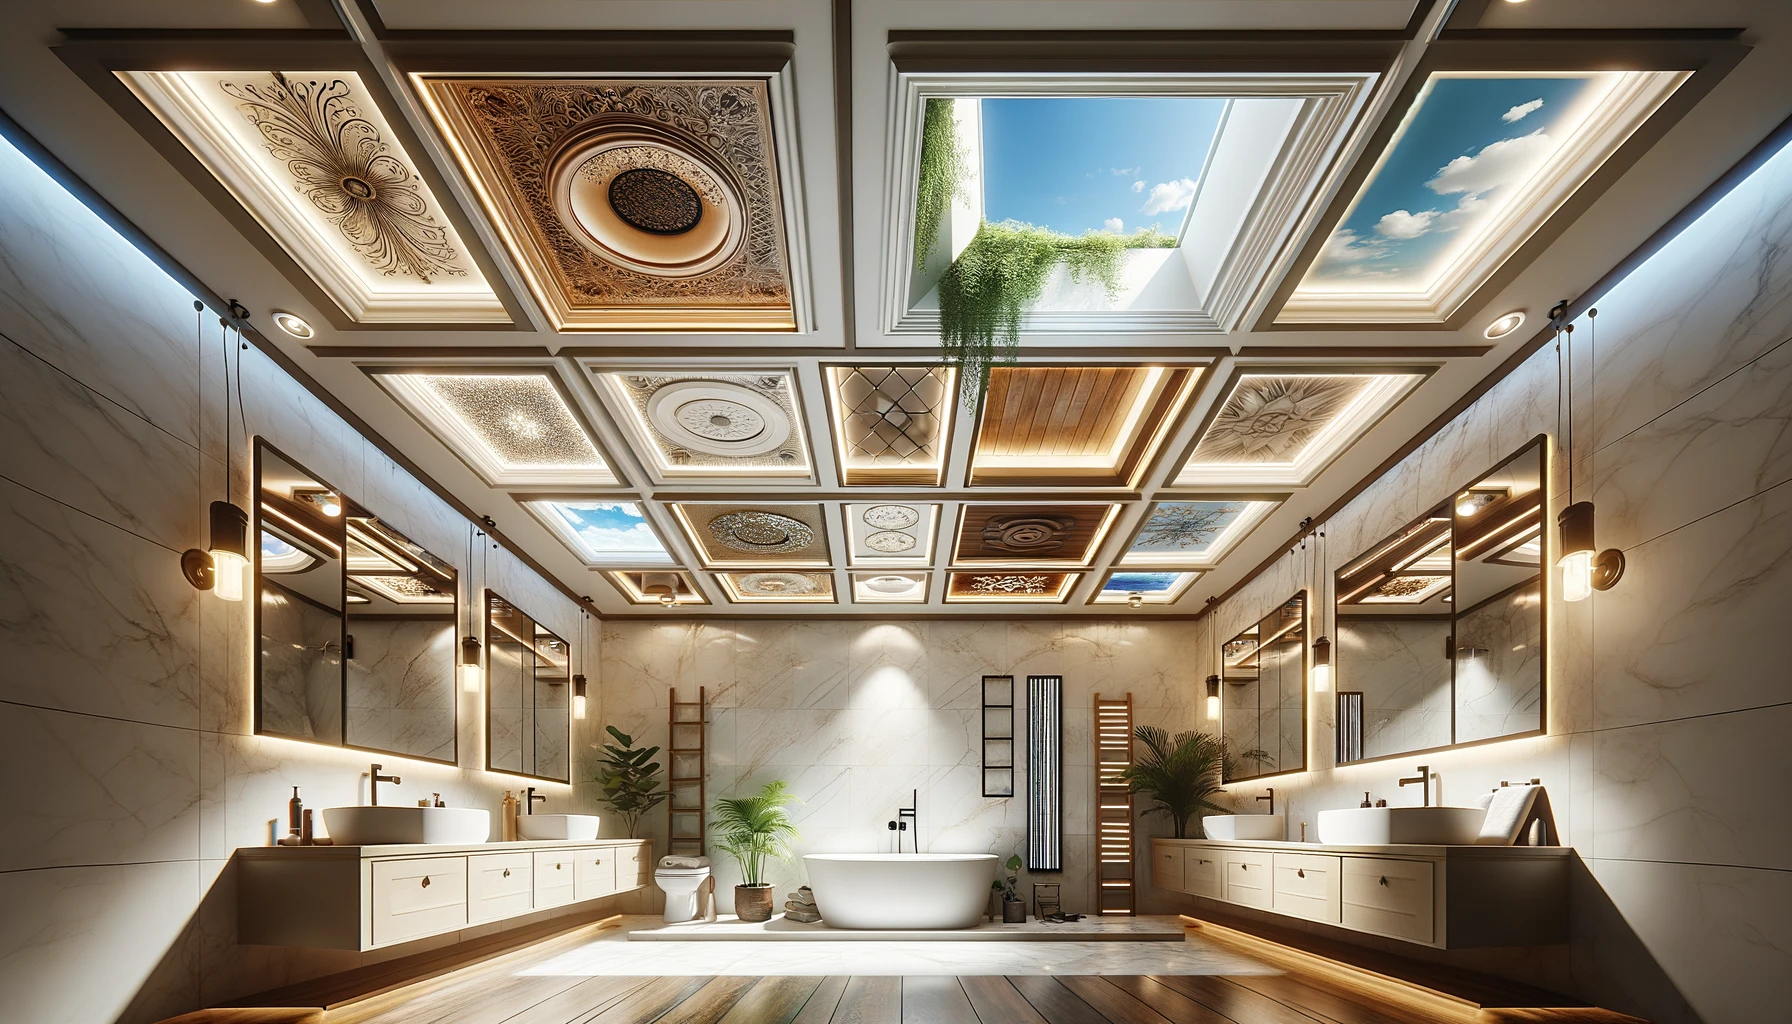 11 Of The Best Bathroom Ceiling Ideas